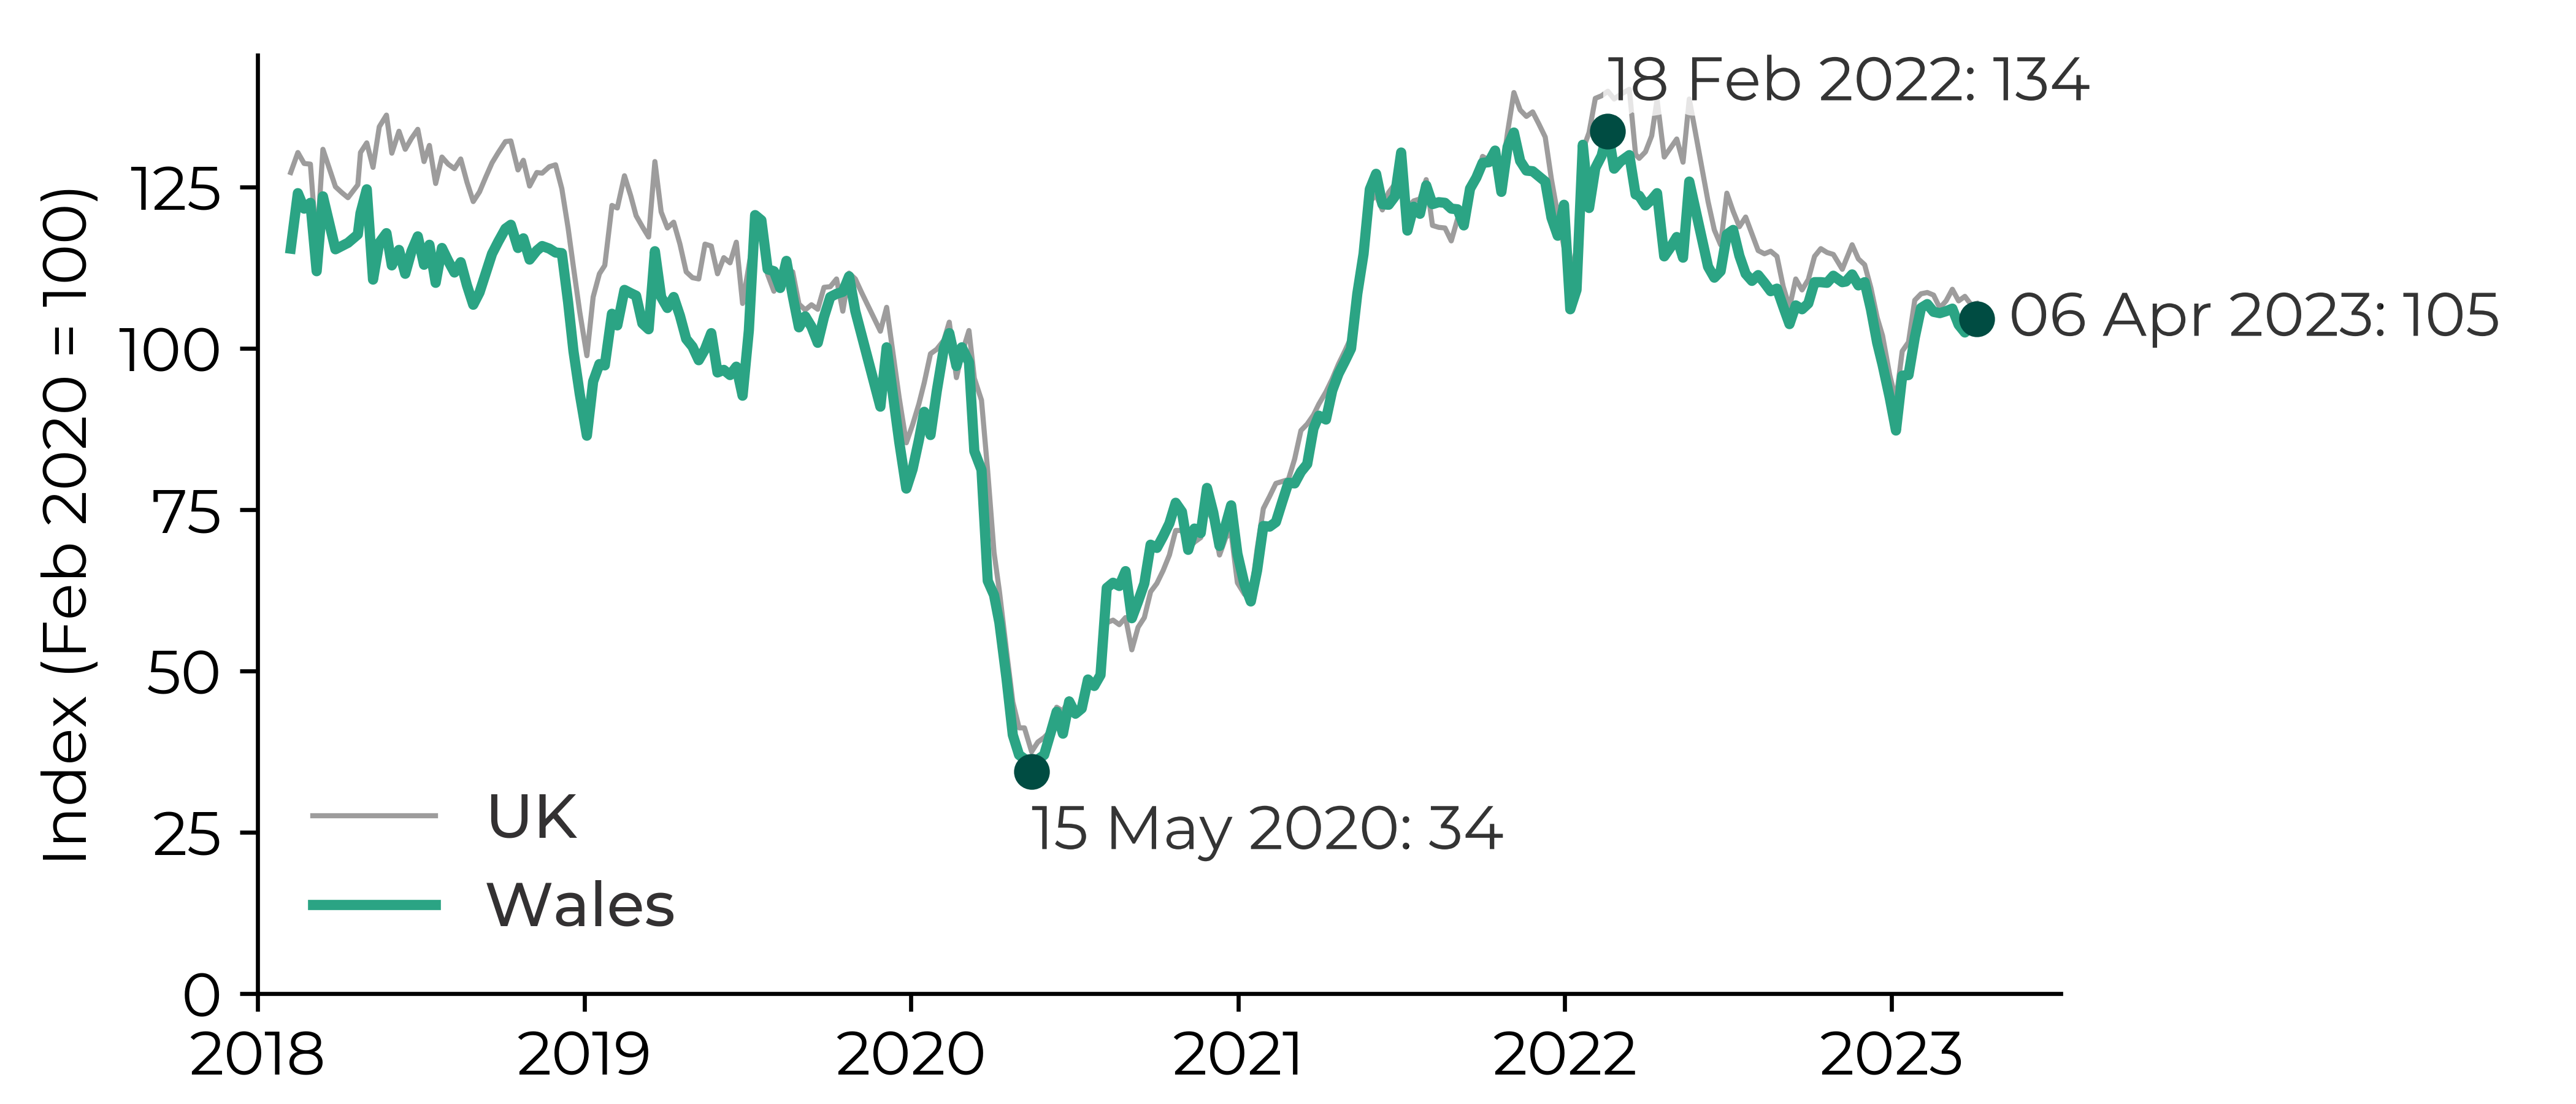 Graph showing that the index decreased from 100 in February 2020 to 34 in May 2020. The index increased to 134 by February 2022 and decreased to 105 by April 2023.